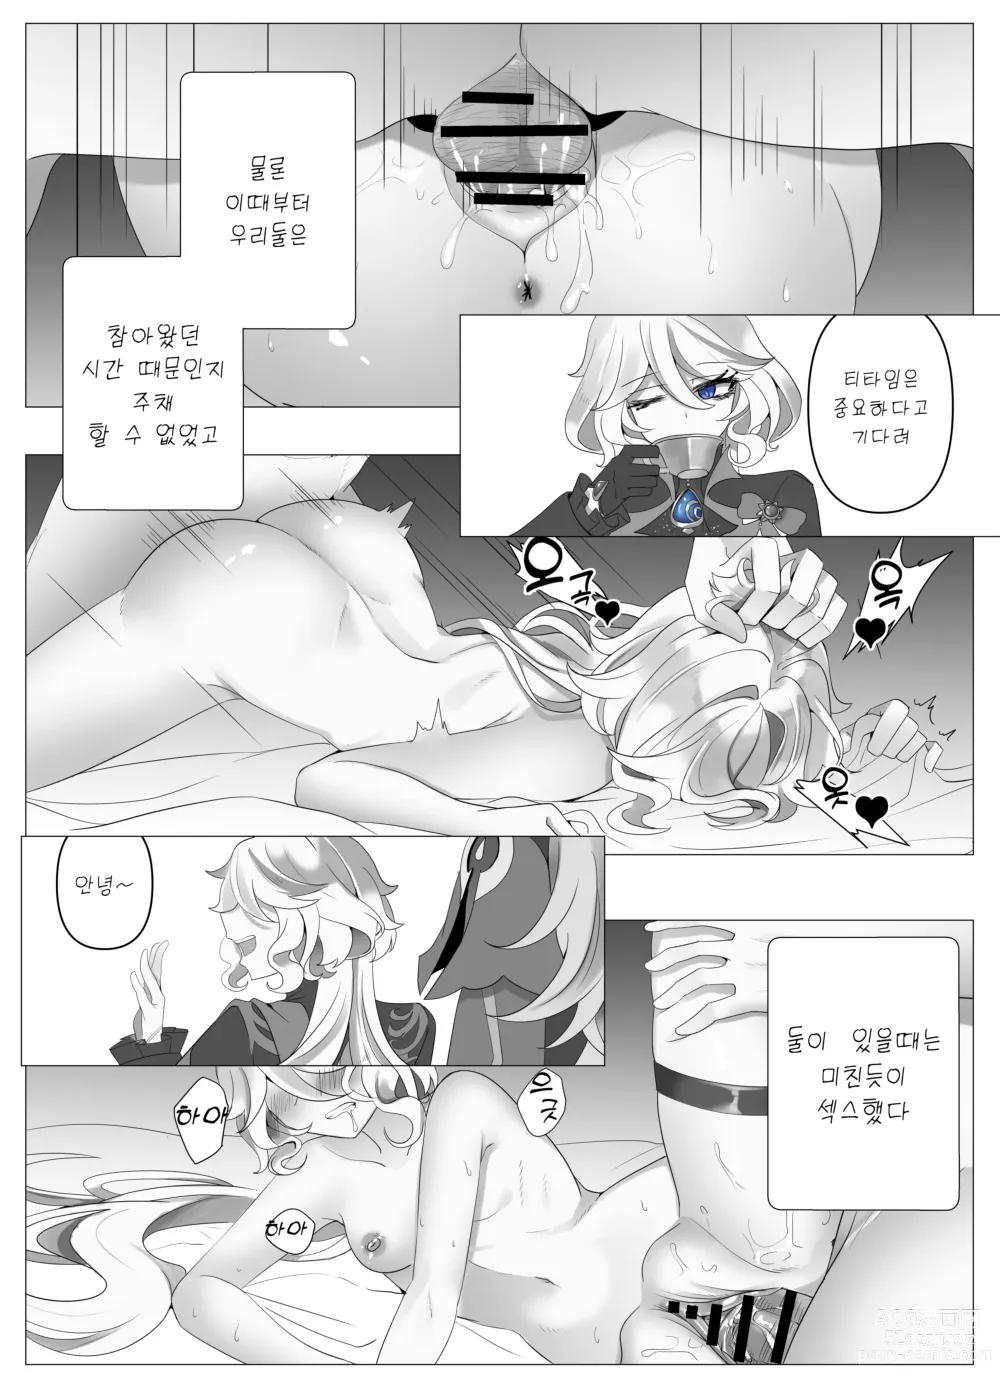 Page 29 of doujinshi Meaningless Time